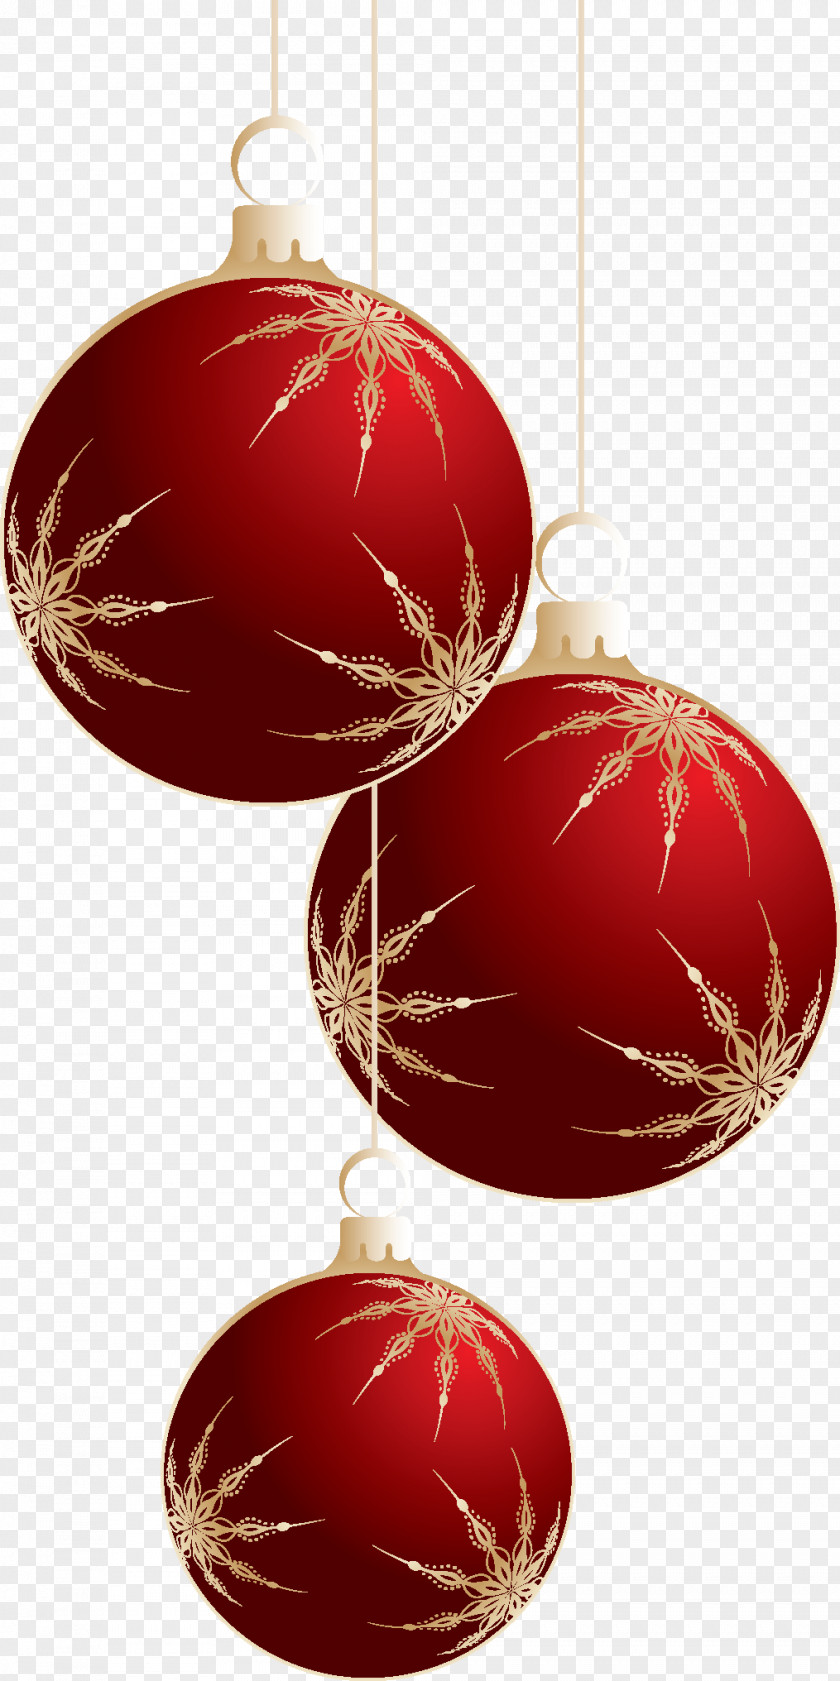 Eraser Christmas Ornament New Year Party Desktop Wallpaper PNG